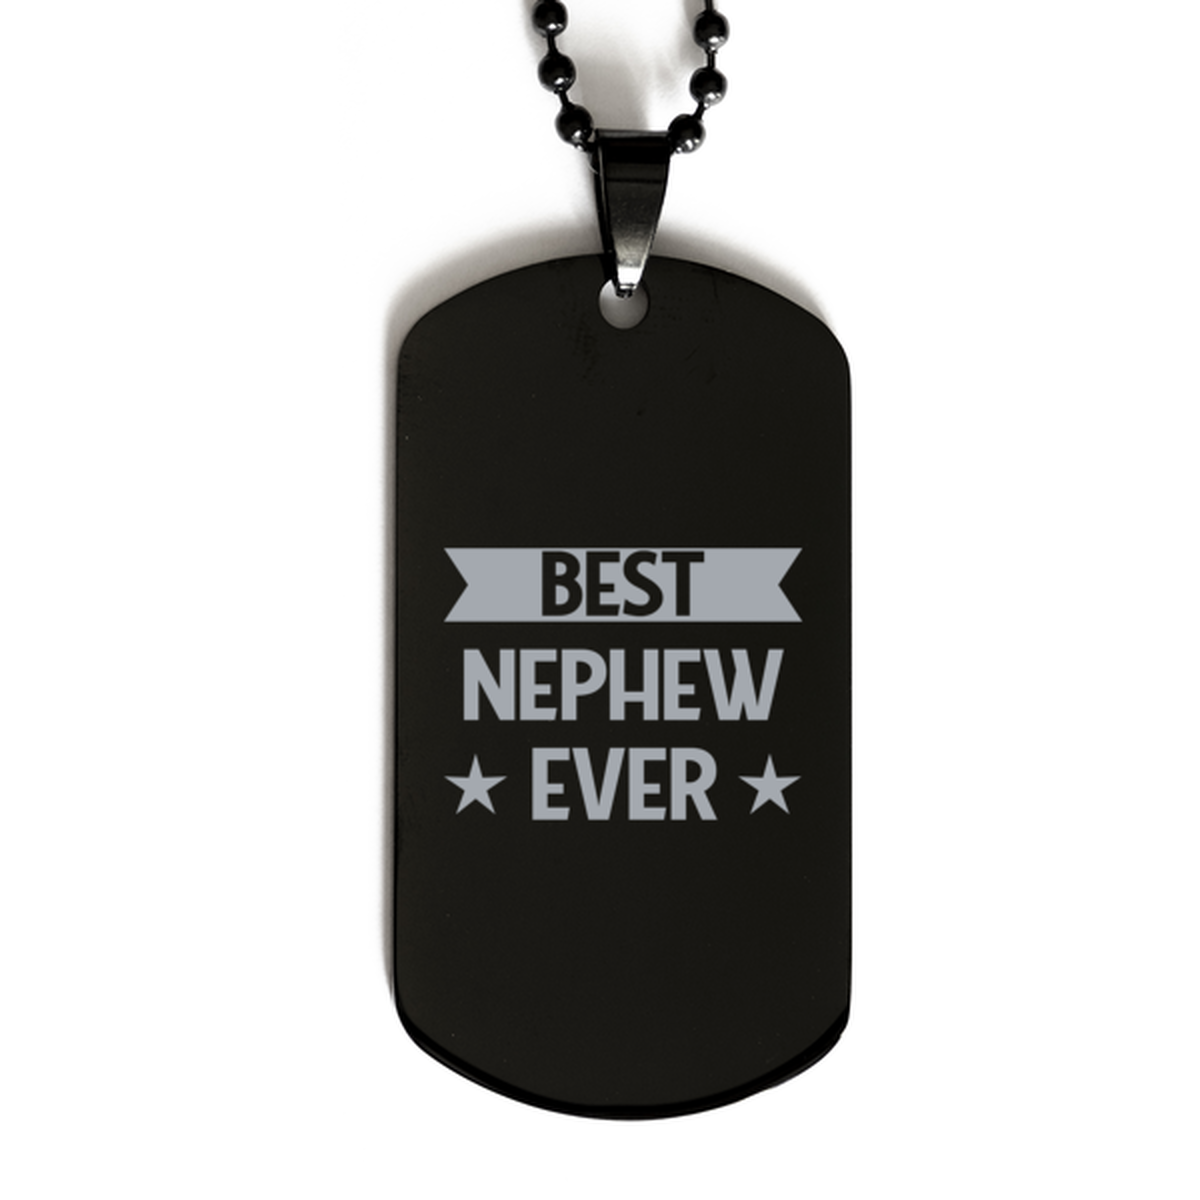 Best Nephew Ever Nephew Gifts, Funny Black Dog Tag For Nephew, Birthday Family Presents Engraved Necklace For Women